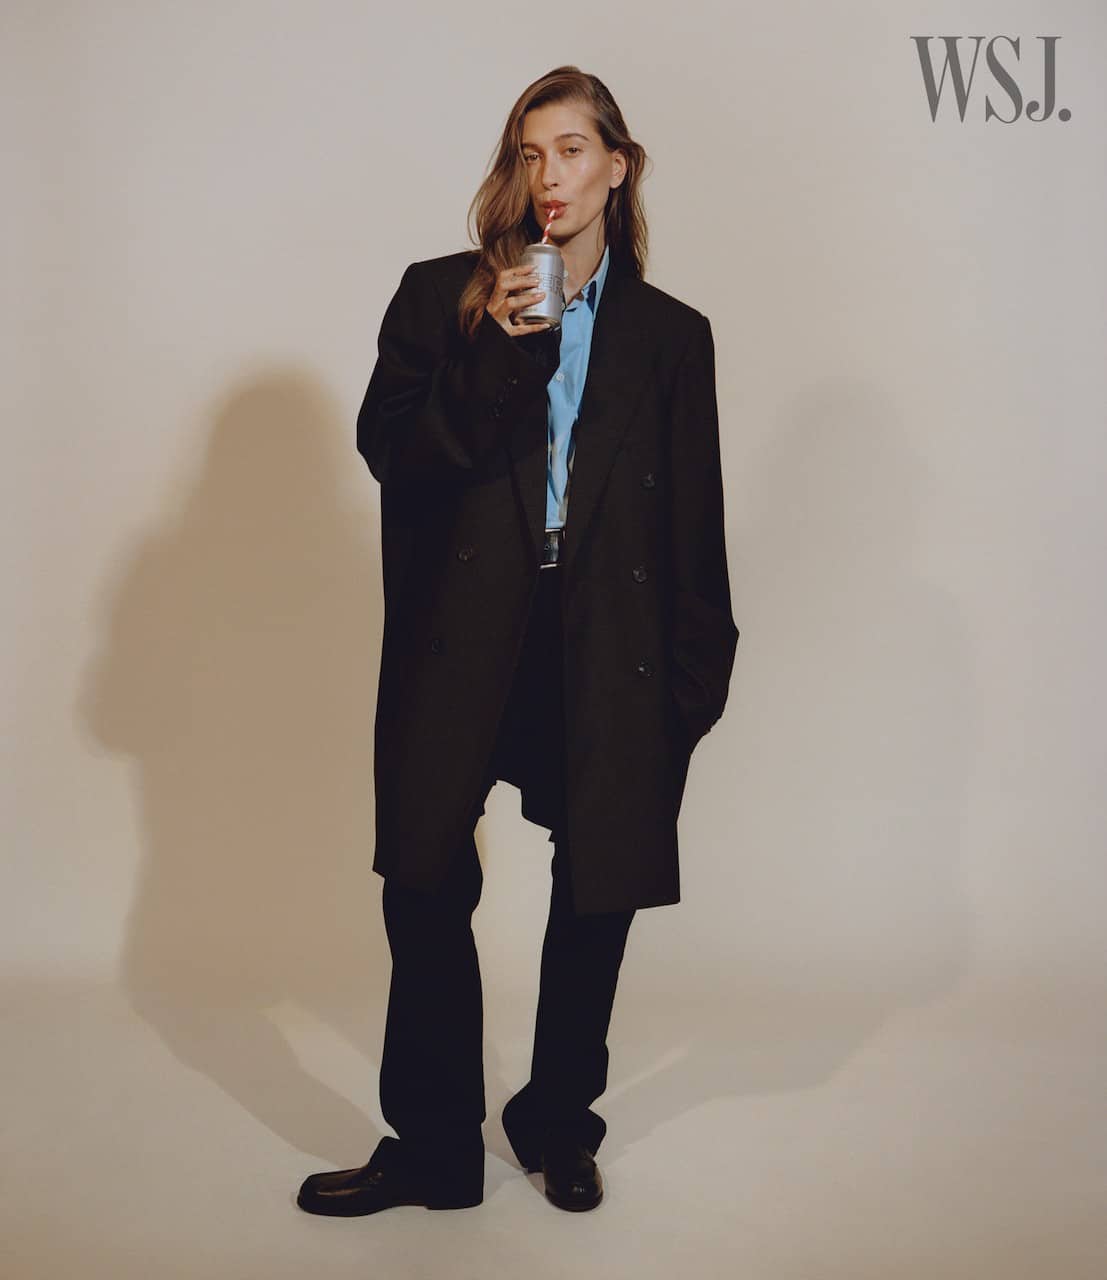 Hailey Bieber on the Cover of WSJ Magazine Women’s Fashion Spring 2022